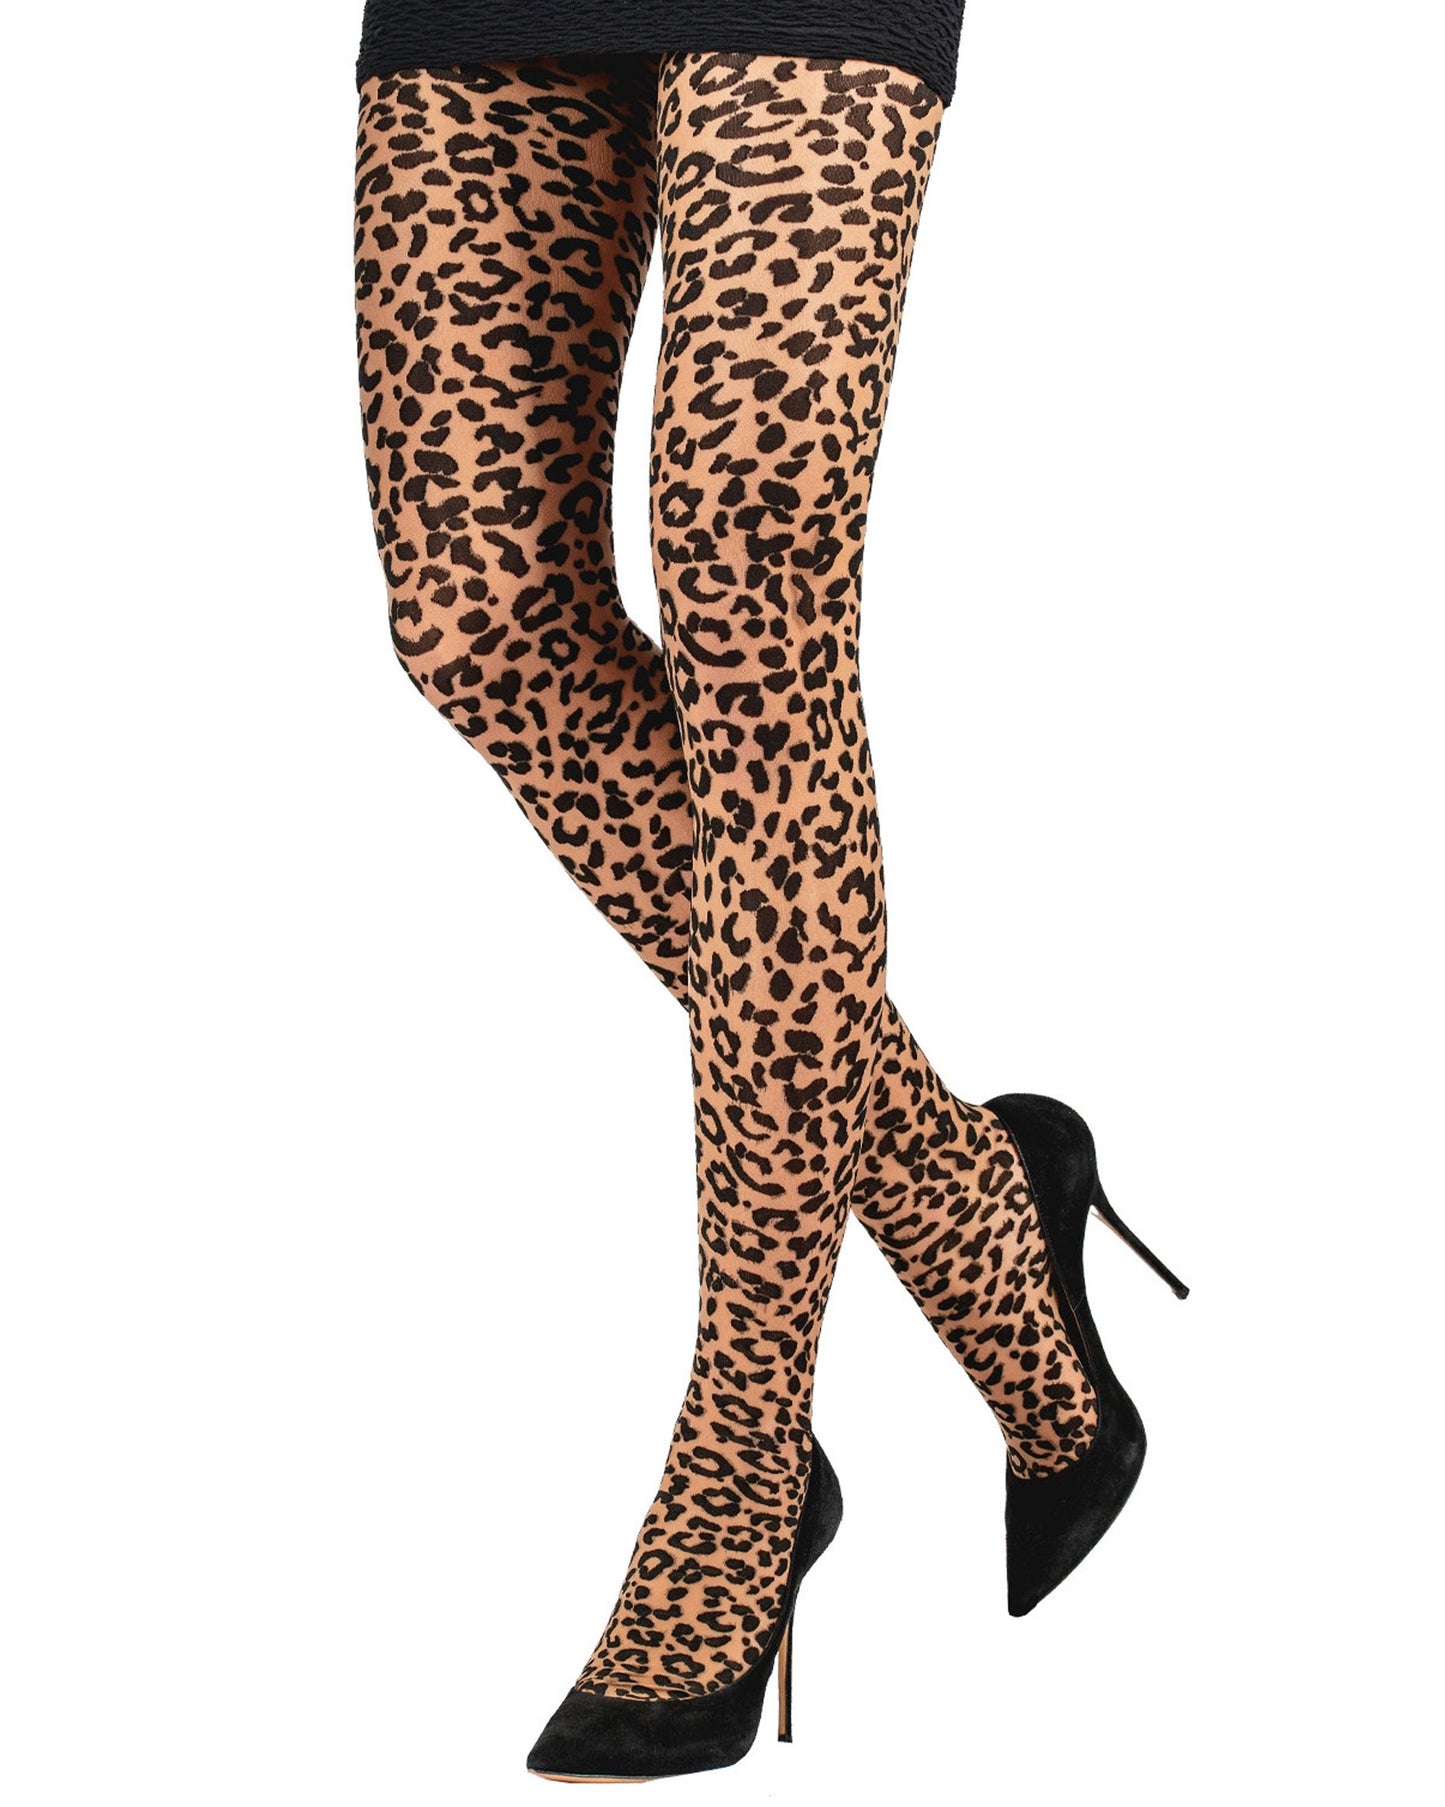 Emilio Cavallini Leopard Tights - sheer nude fashion tights with a black opaque animal print pattern, worn with black mini skirt and high heel stilettos